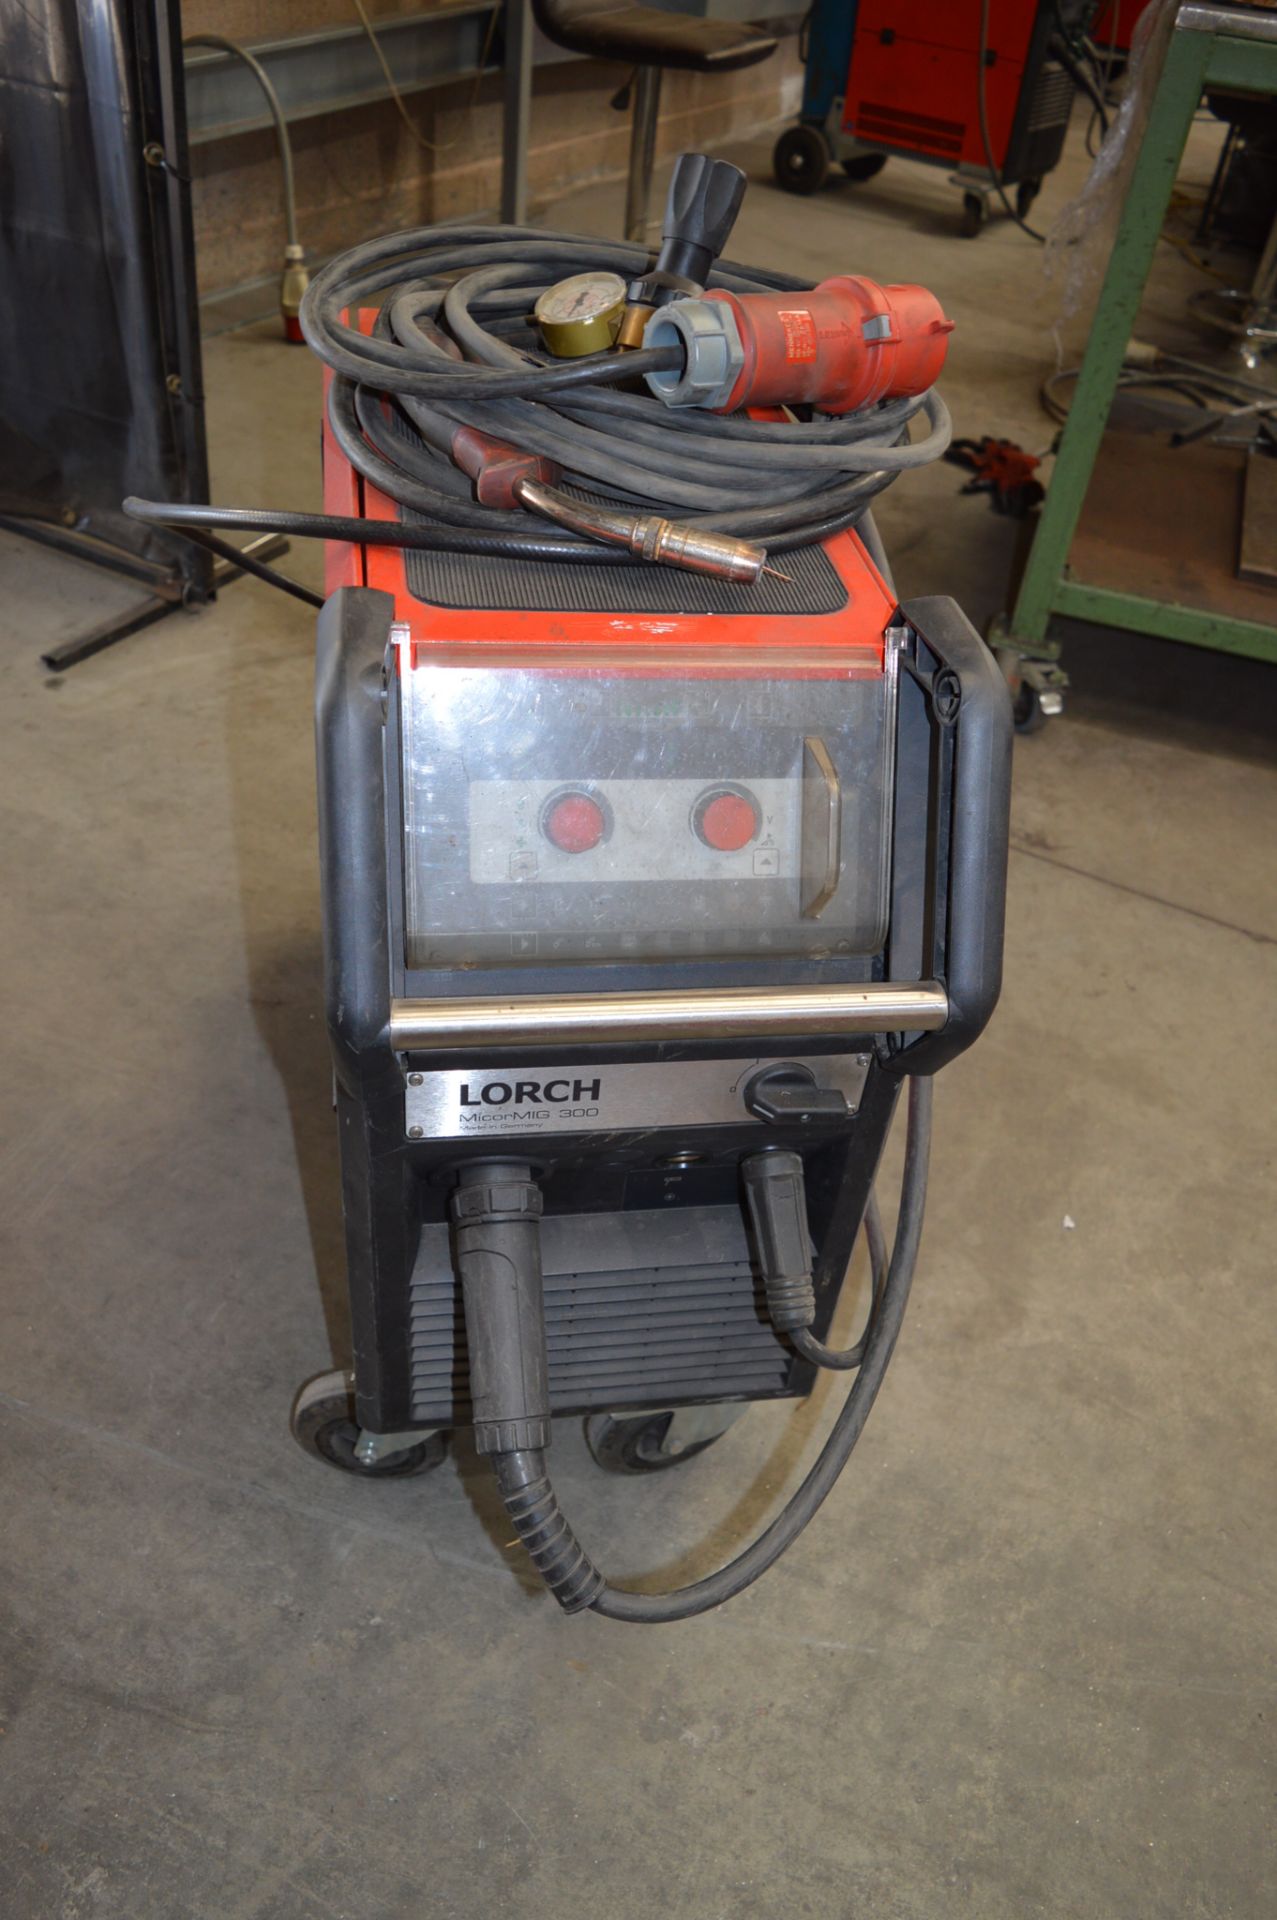 Lorch Micromig 300 MIG welder S/N: 4064-2621-0001-0 c/w torch, regulator and earth lead - Image 2 of 5